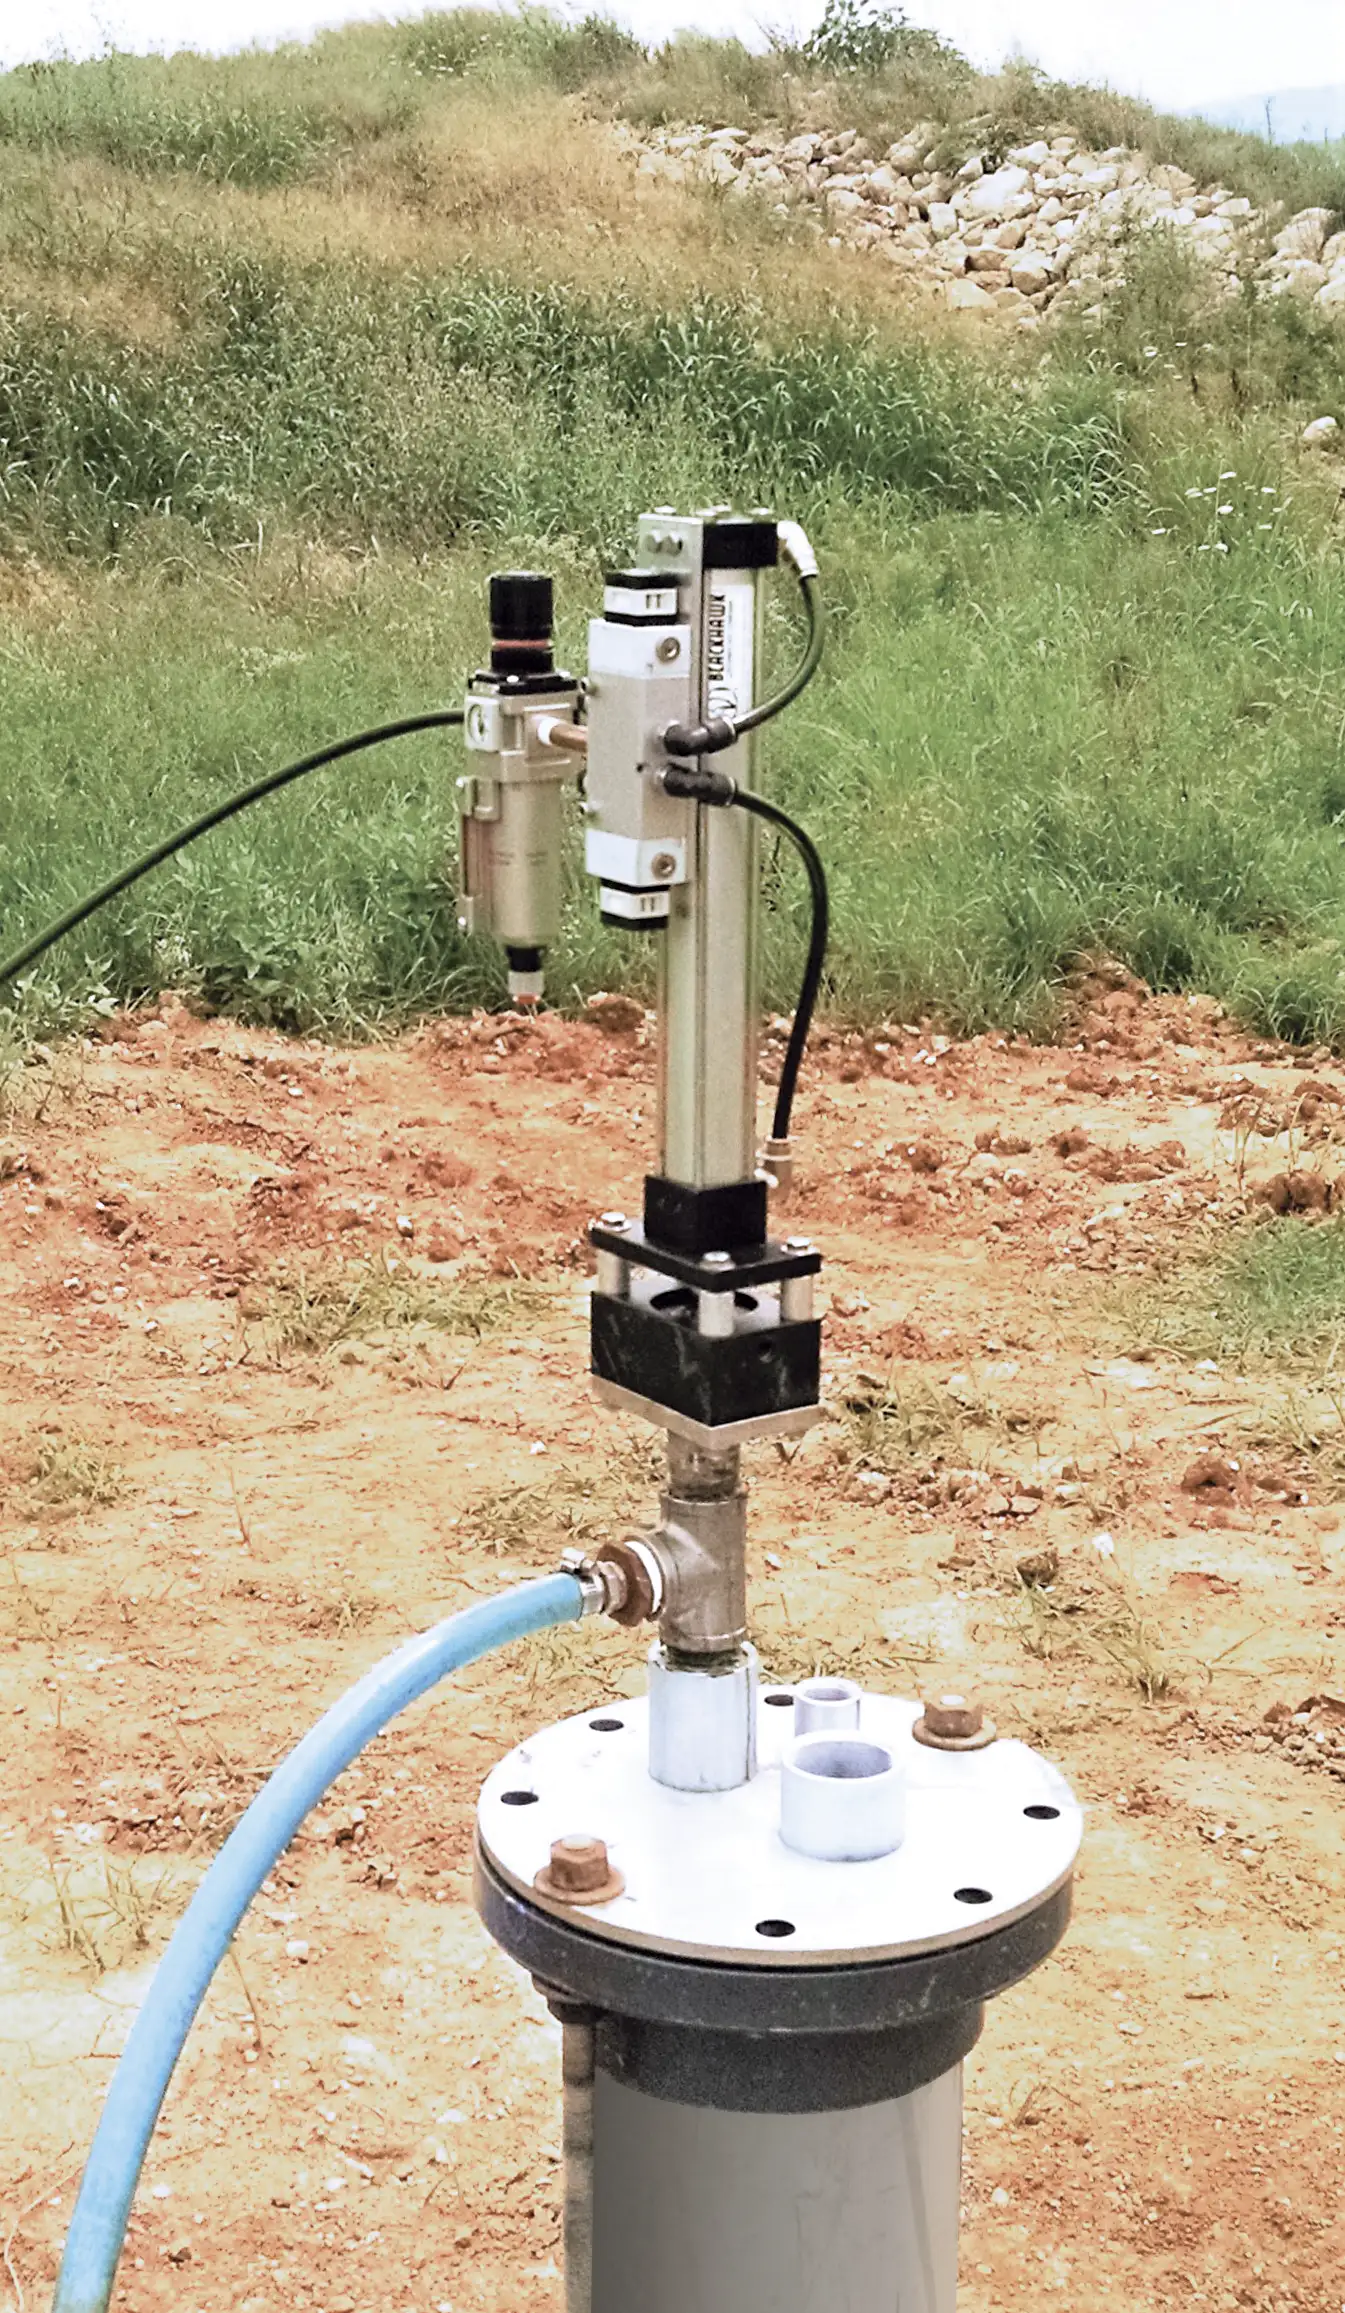 A top-head drive pump is mounted on a cylindrical structure with hoses connected, located outdoors on a dirt patch with grassy surroundings and rocks in the background.